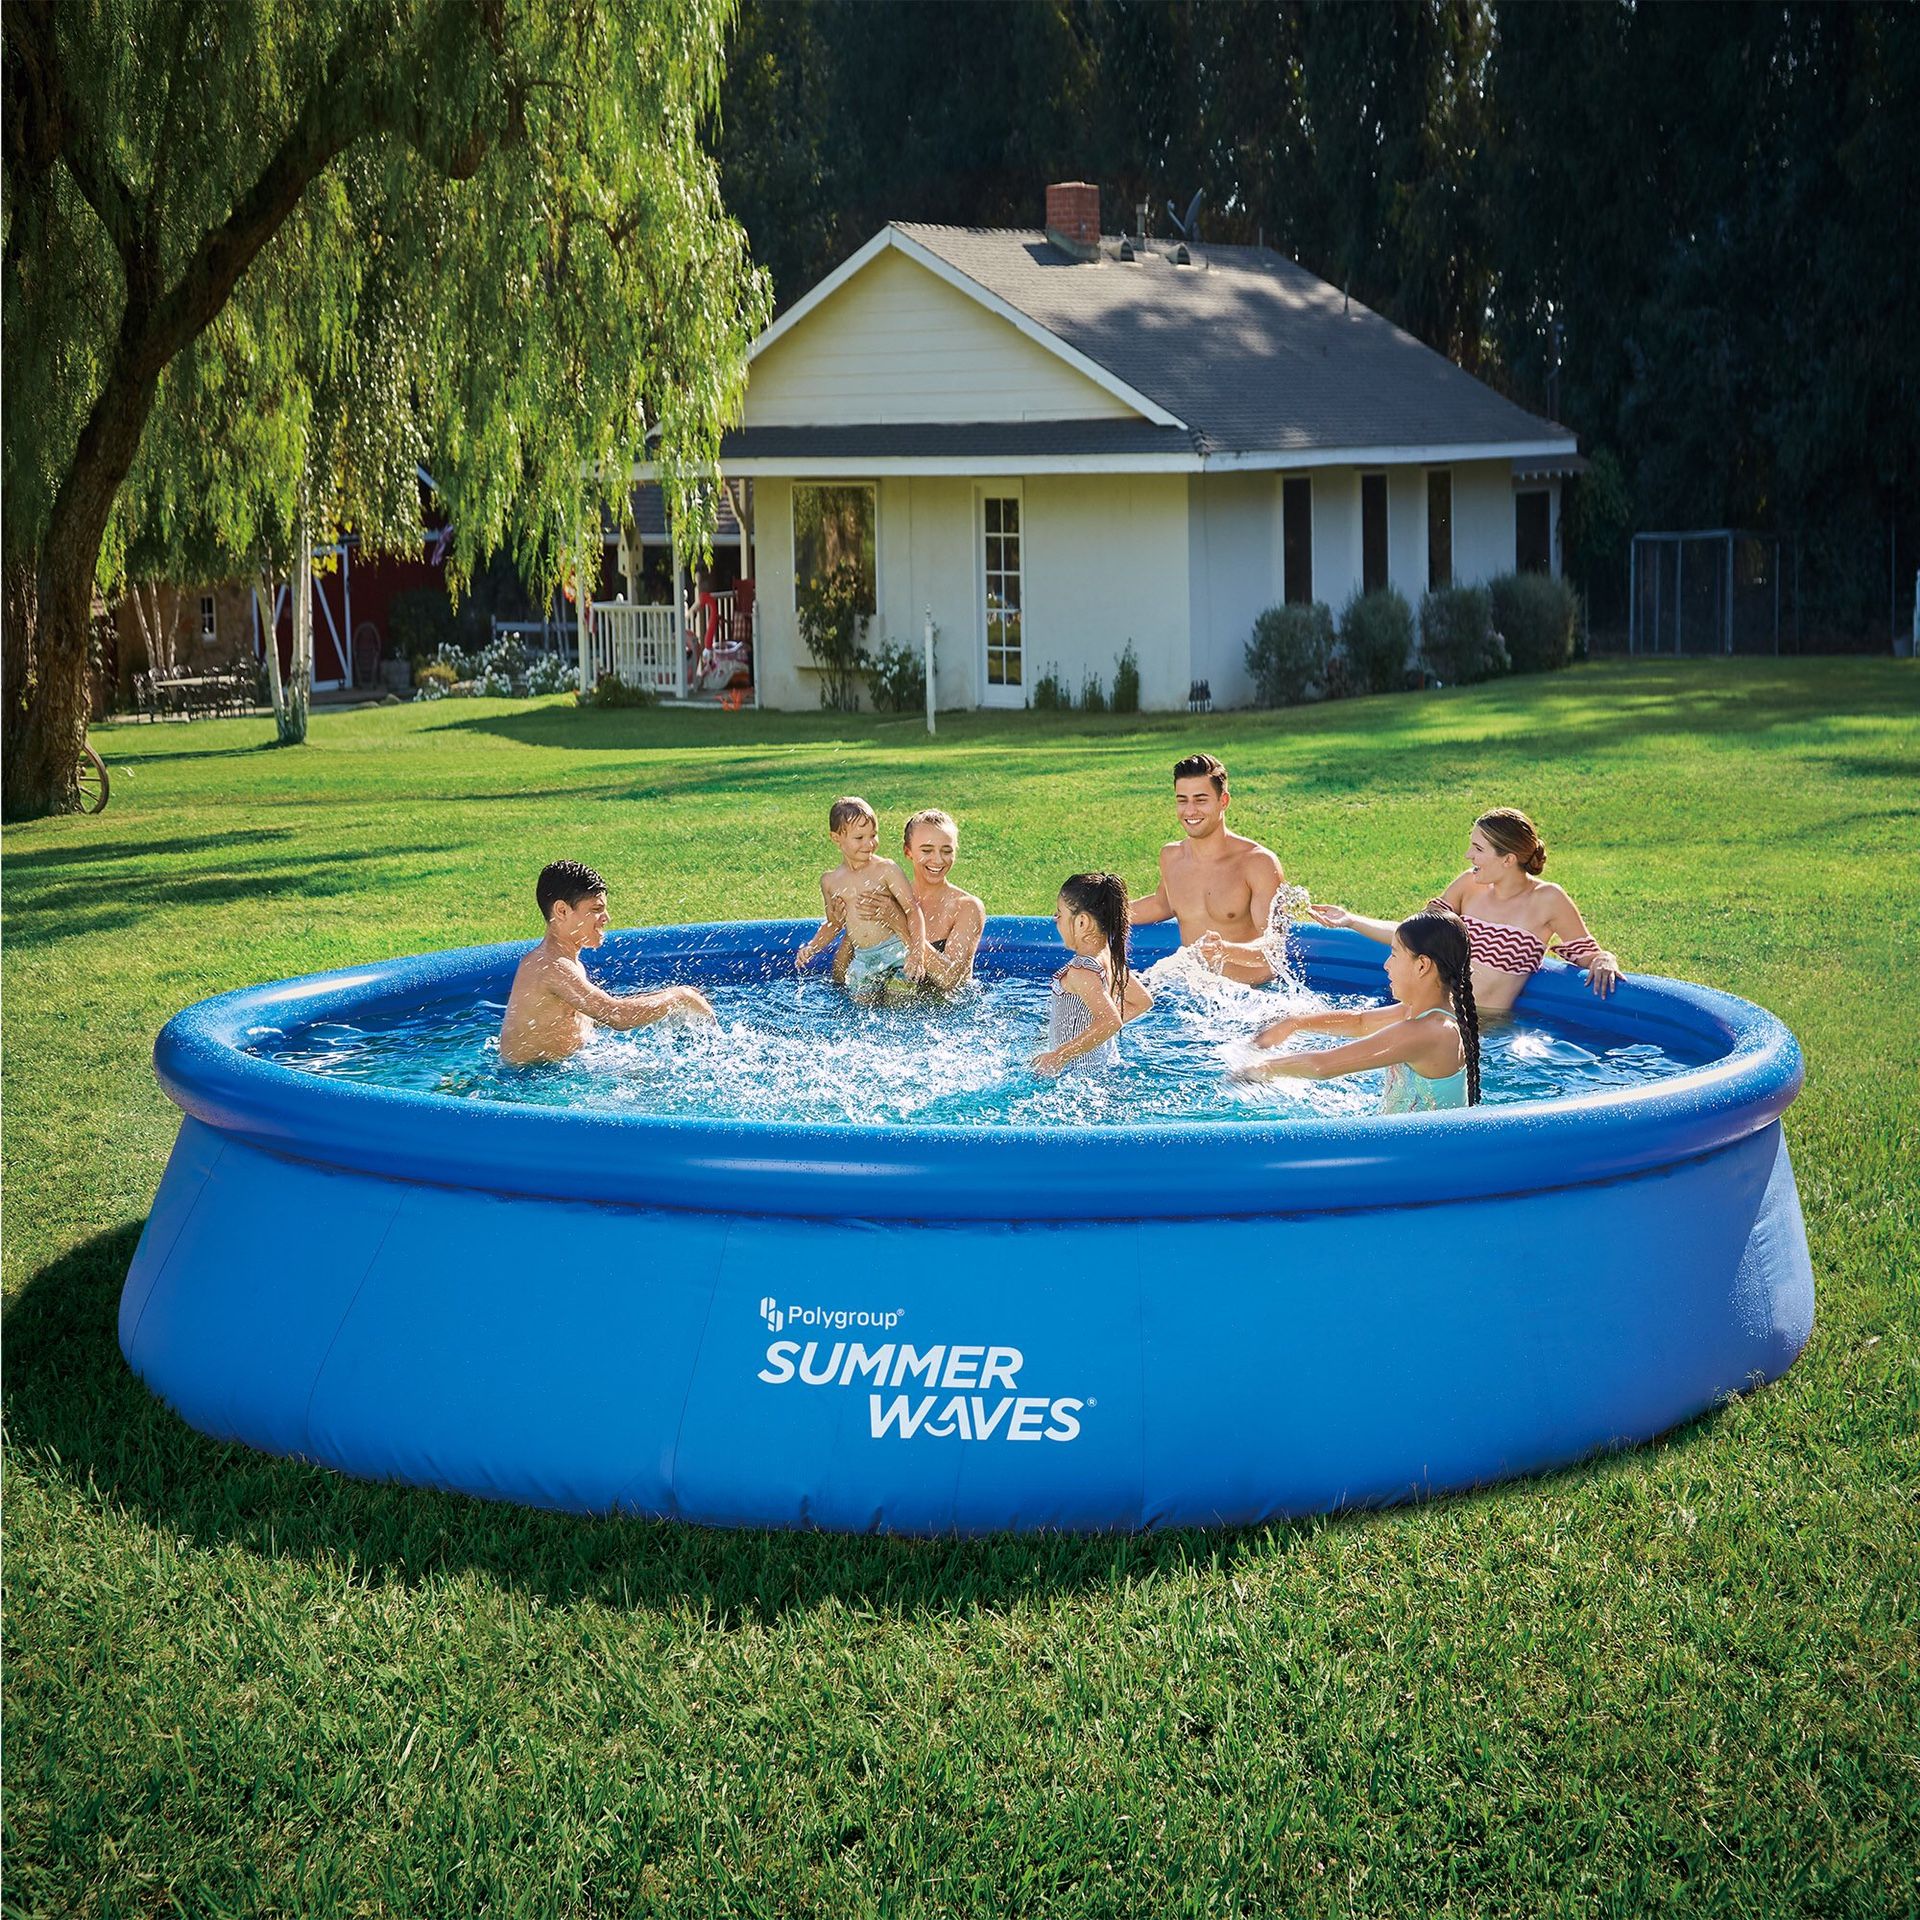 Summer Waves 15-Foot Quick Set Ring Pool with 600 GPH Filter Pump! Great Summer Fun for the Family!